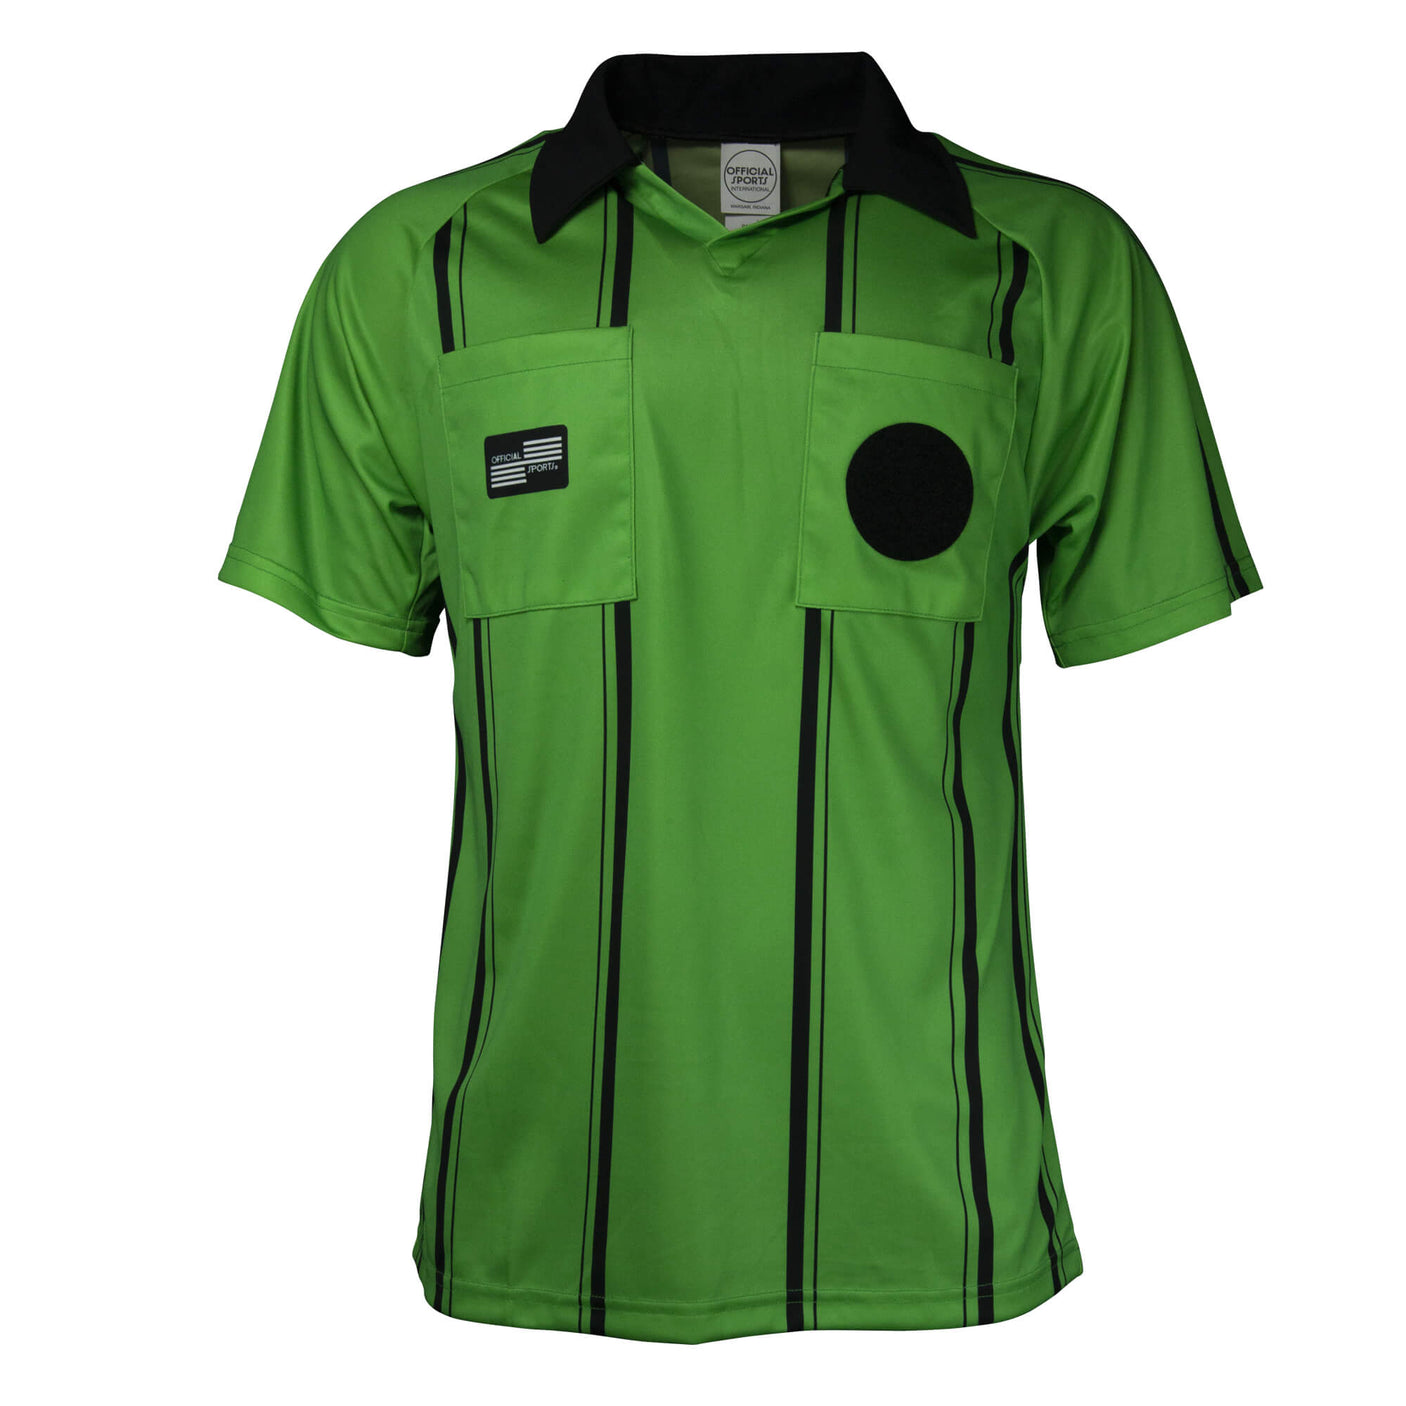 Official Sports Men's USSF Economy SS Shirt Green/Black